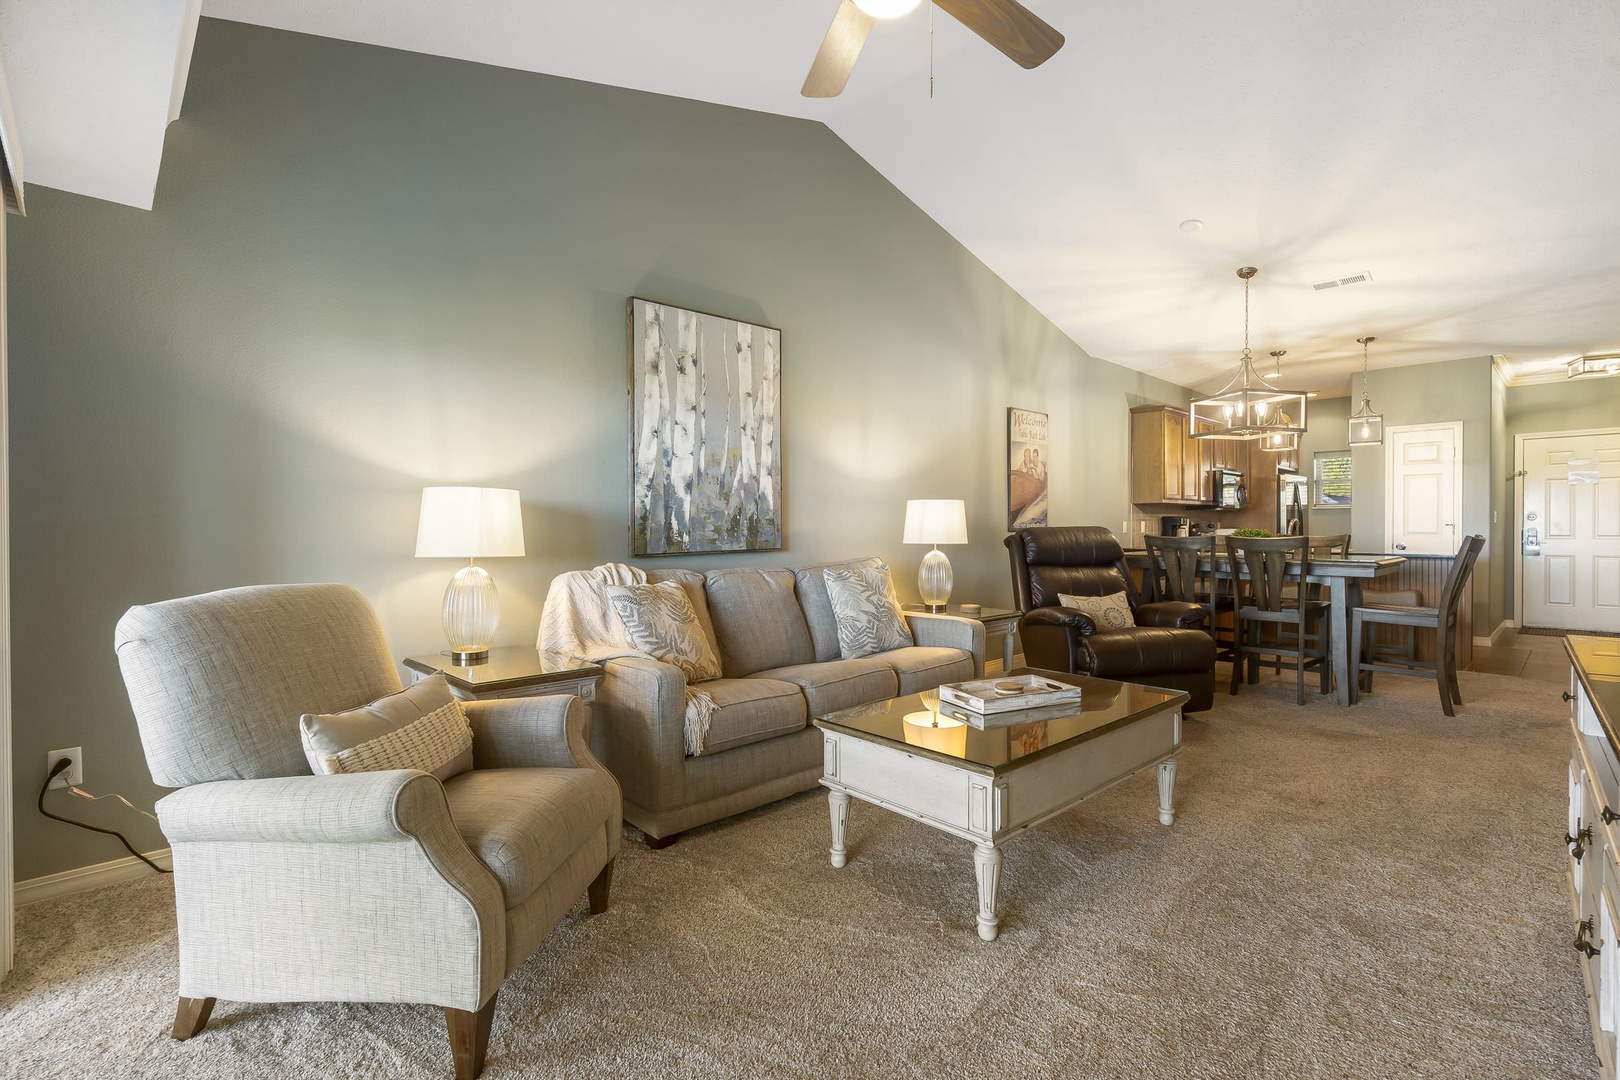 Ample seating for family and friends in the living area